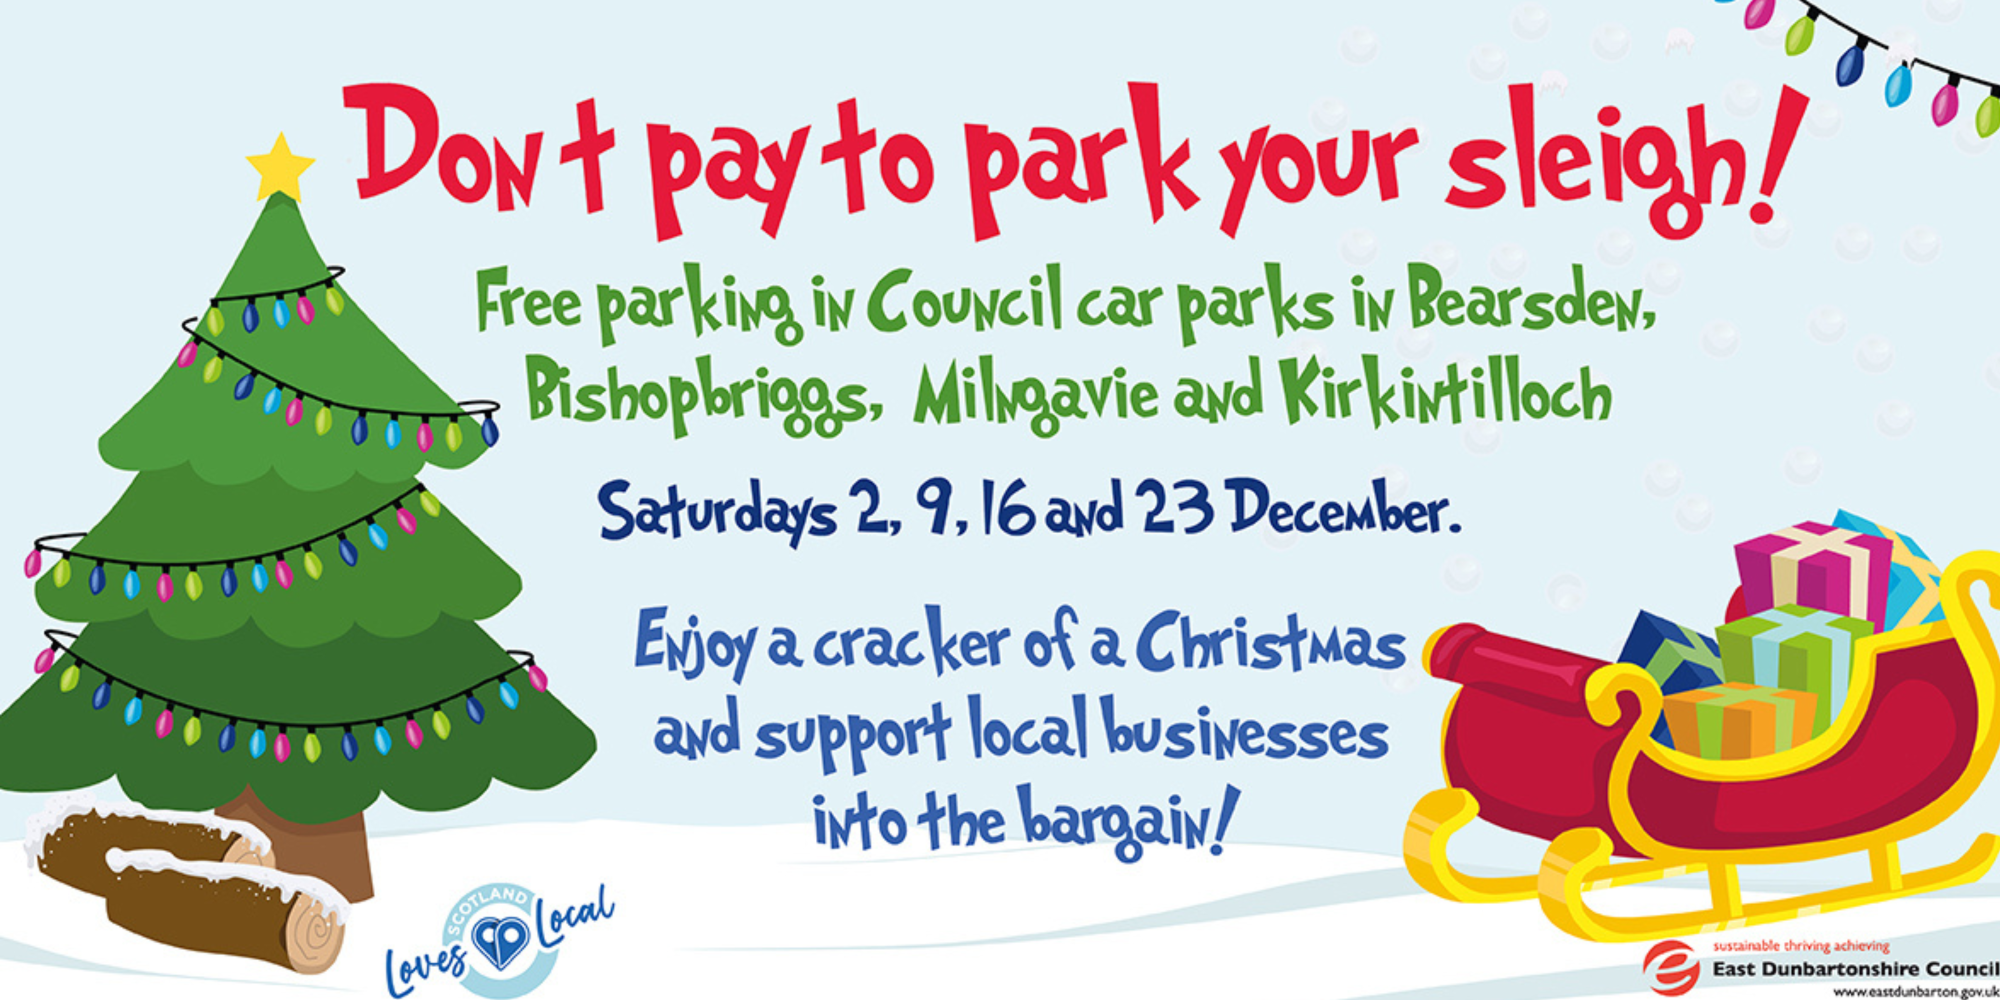 ﻿ Don't pay to park your sleigh! Free parking in Council car parks in Bearsden, Bishopbriggs, Milngavie and Kirkintilloch Saturdays 2, 9, 16 and 23 December. Enjoy a cracker of a Christmas and support local businesses into the bargain!